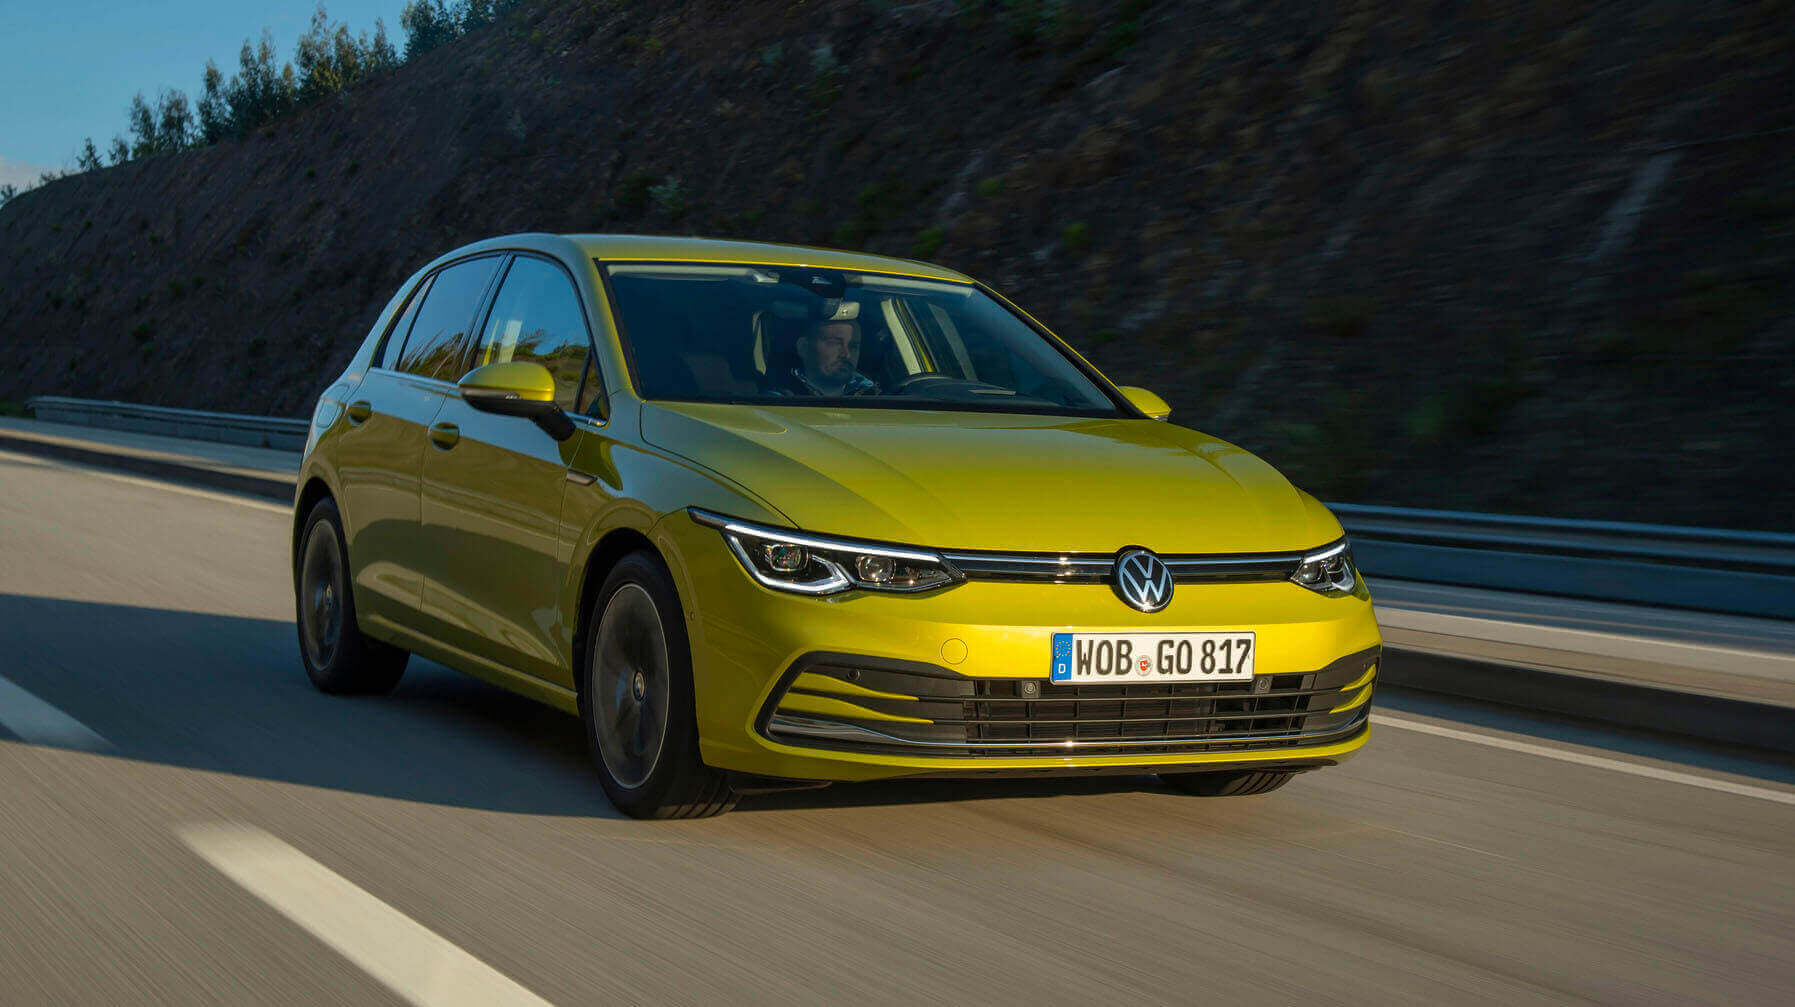 The best new cars for spring 2020; Volkswagen Golf main